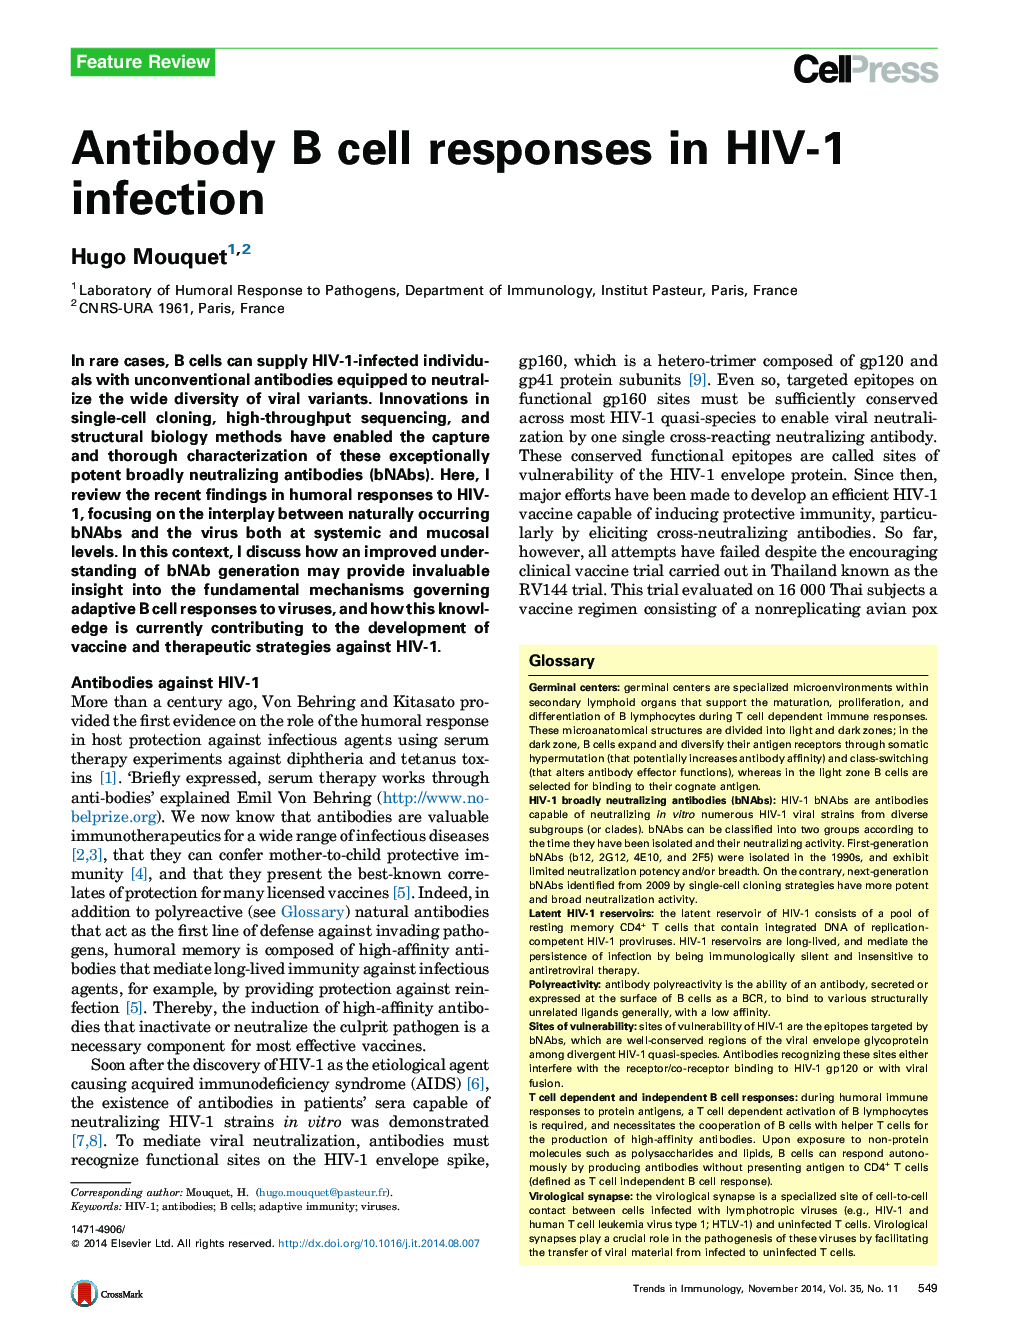 Antibody B cell responses in HIV-1 infection